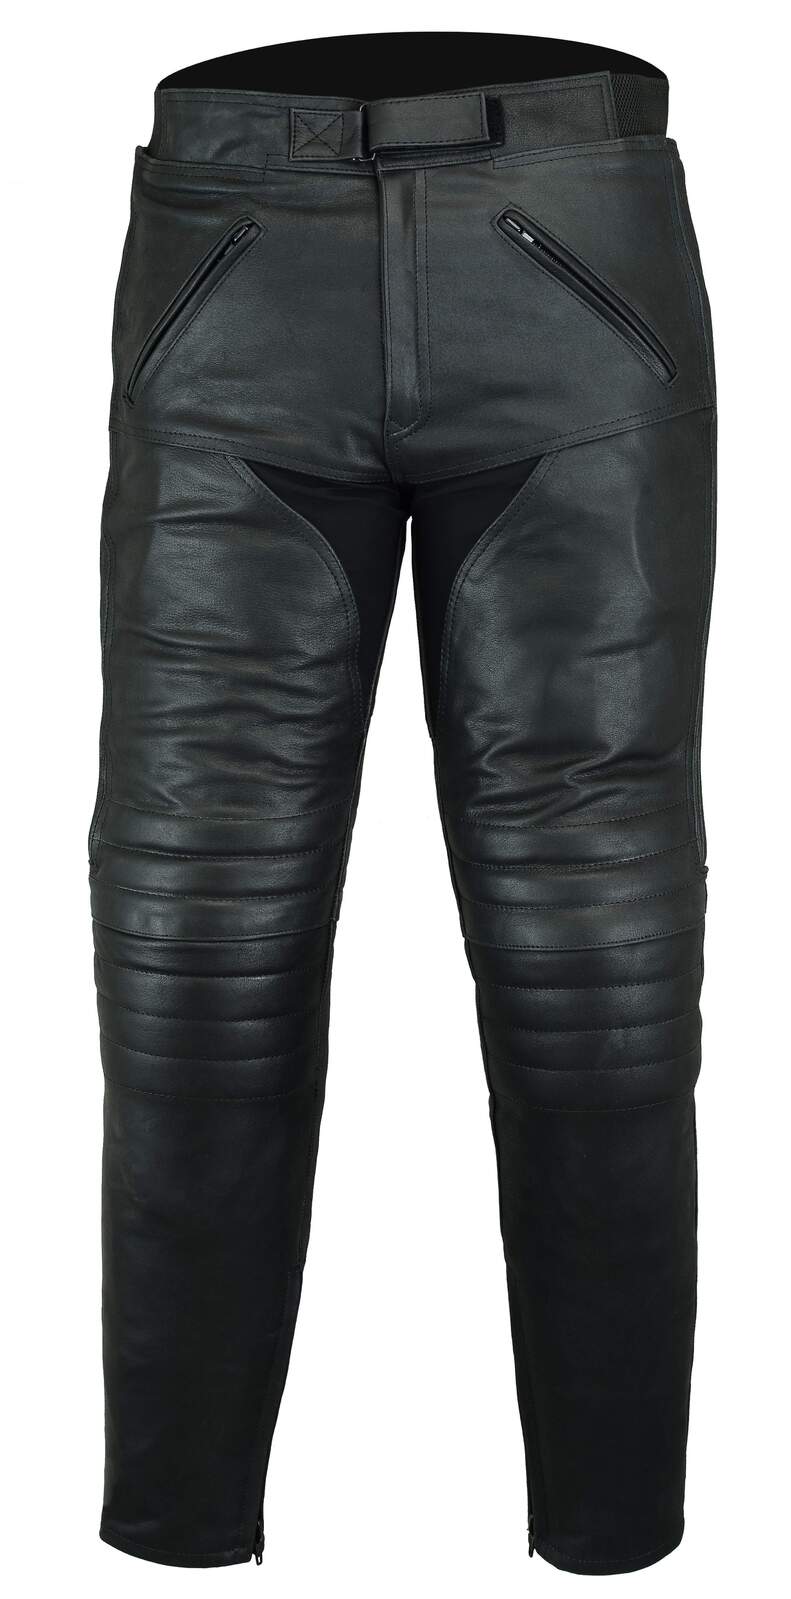 MENS MOTORCYCLE MOTORBIKE CRUISER STYLE TOURING SOFT LEATHER PANTS TROUSER